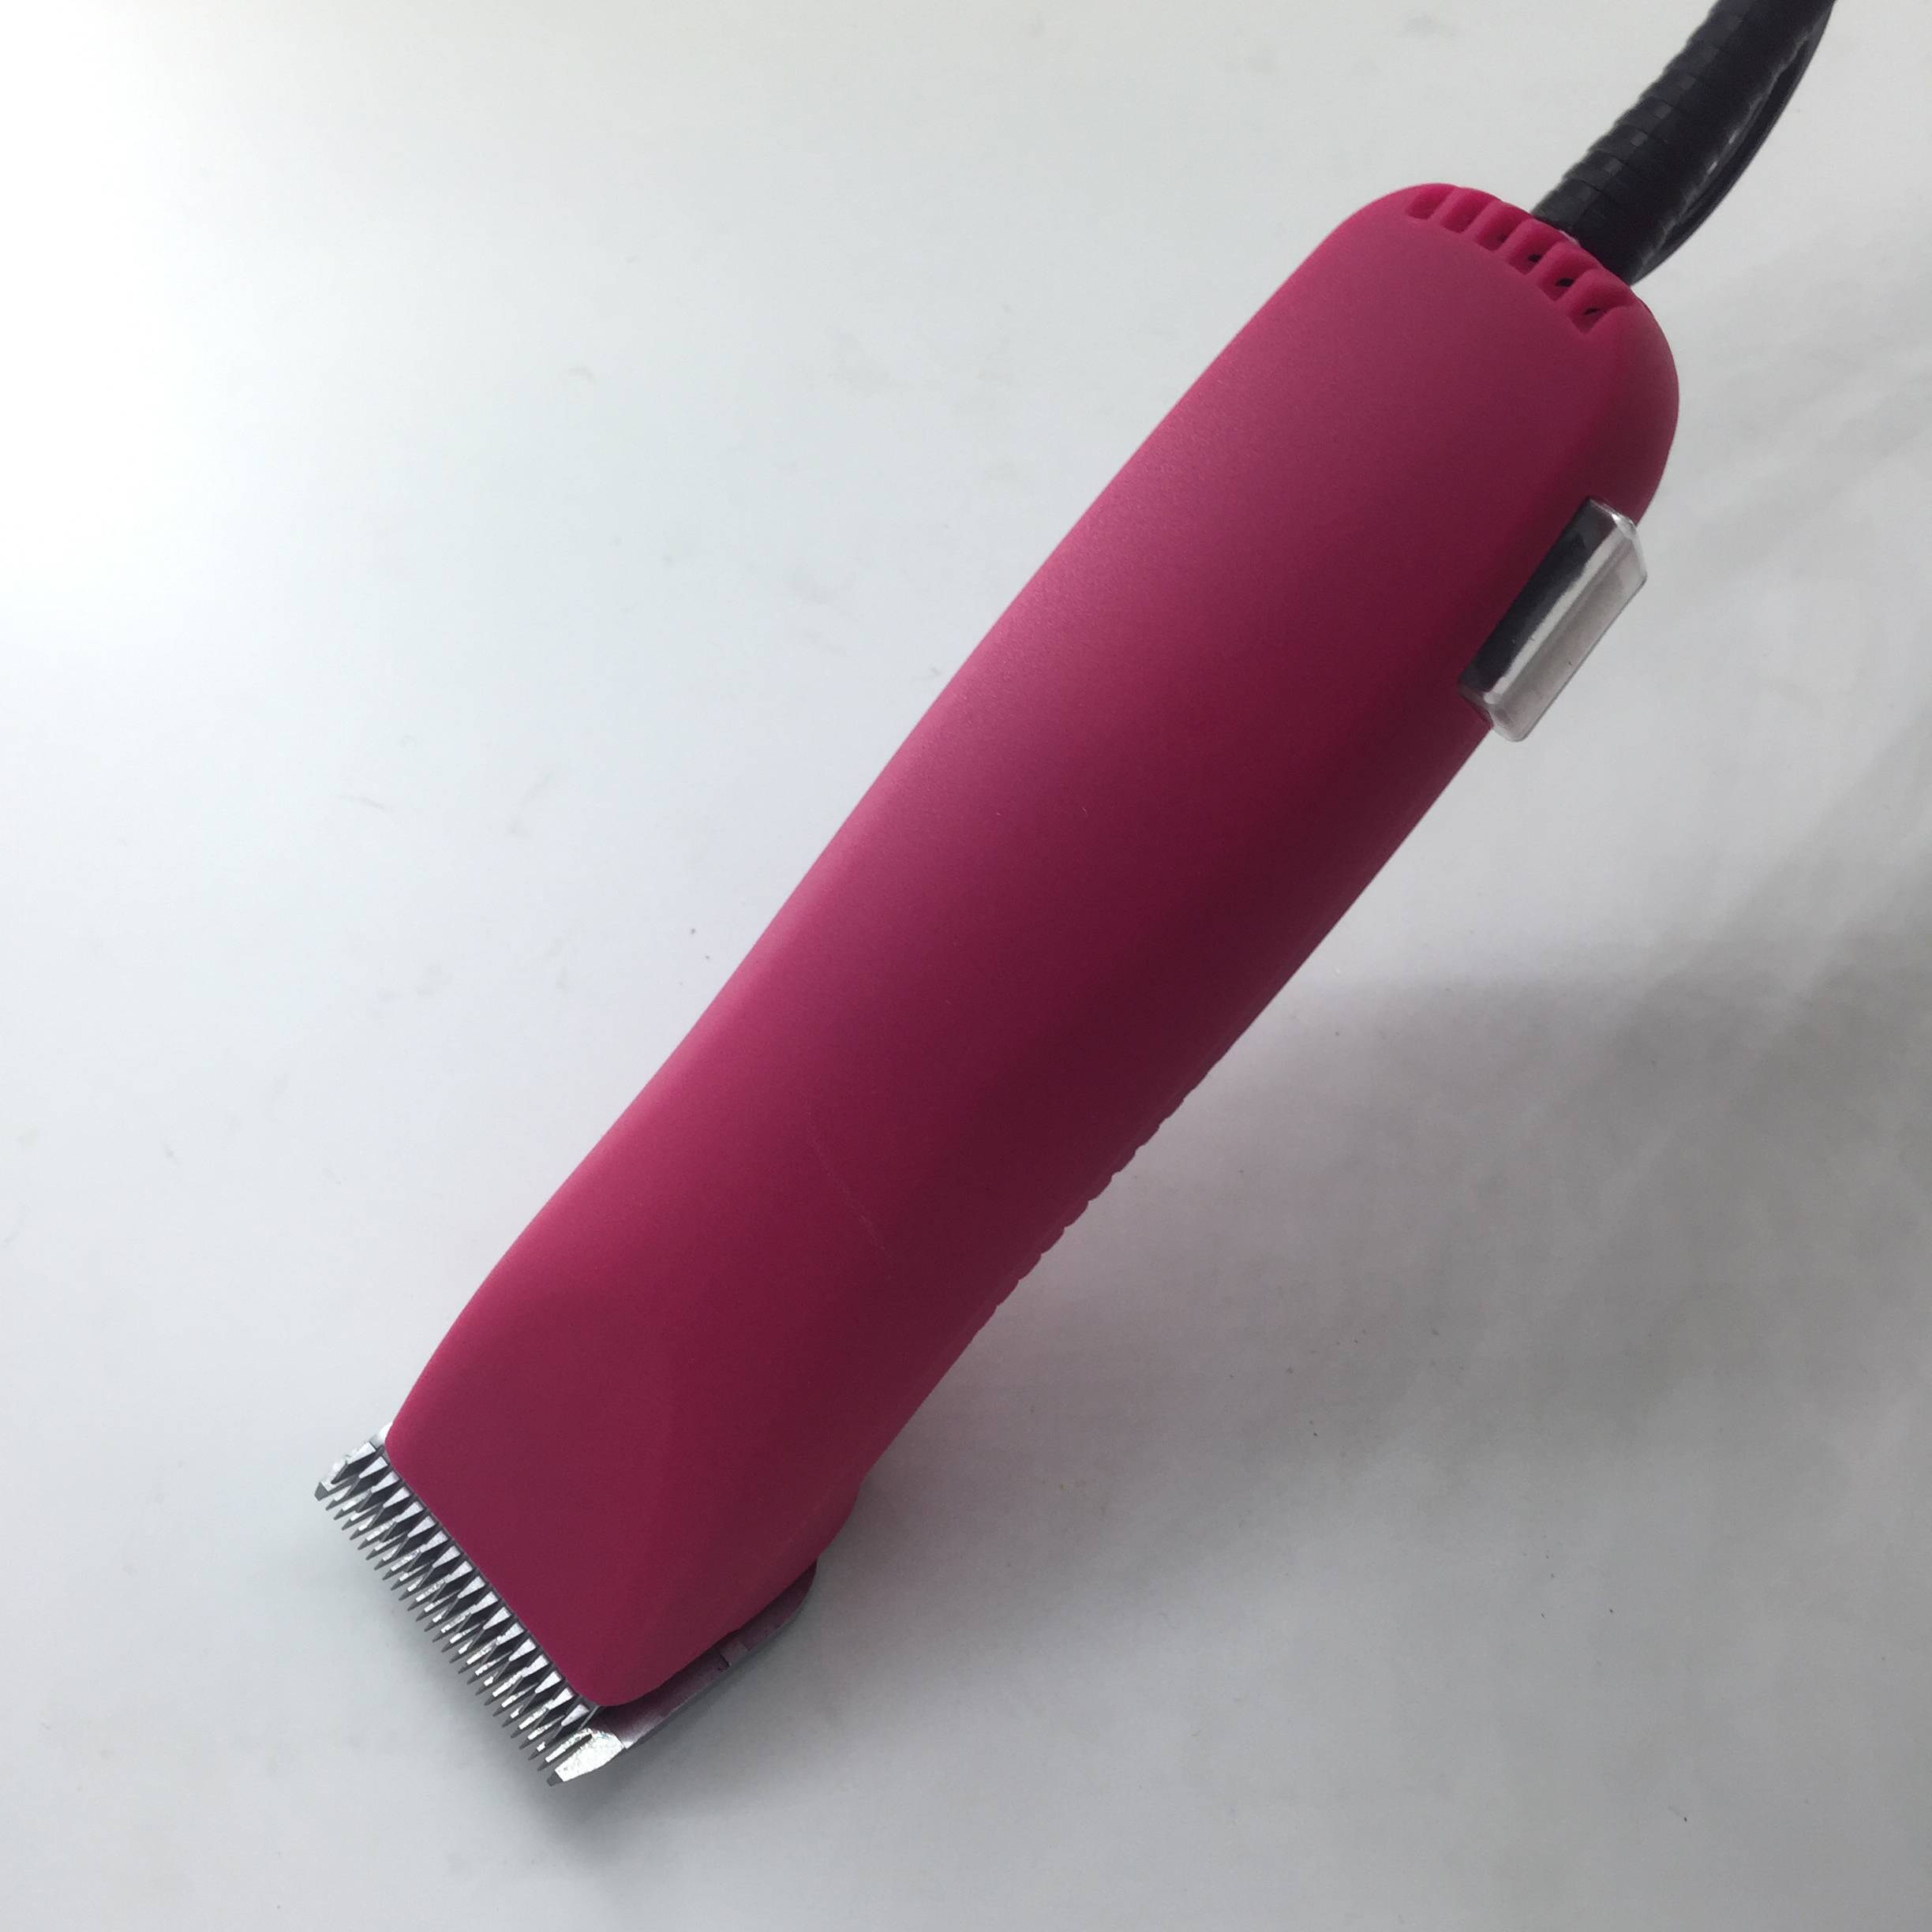 Factory Free sample Professional Pet Hair Trimmer - SR-122 Red Sirreepet